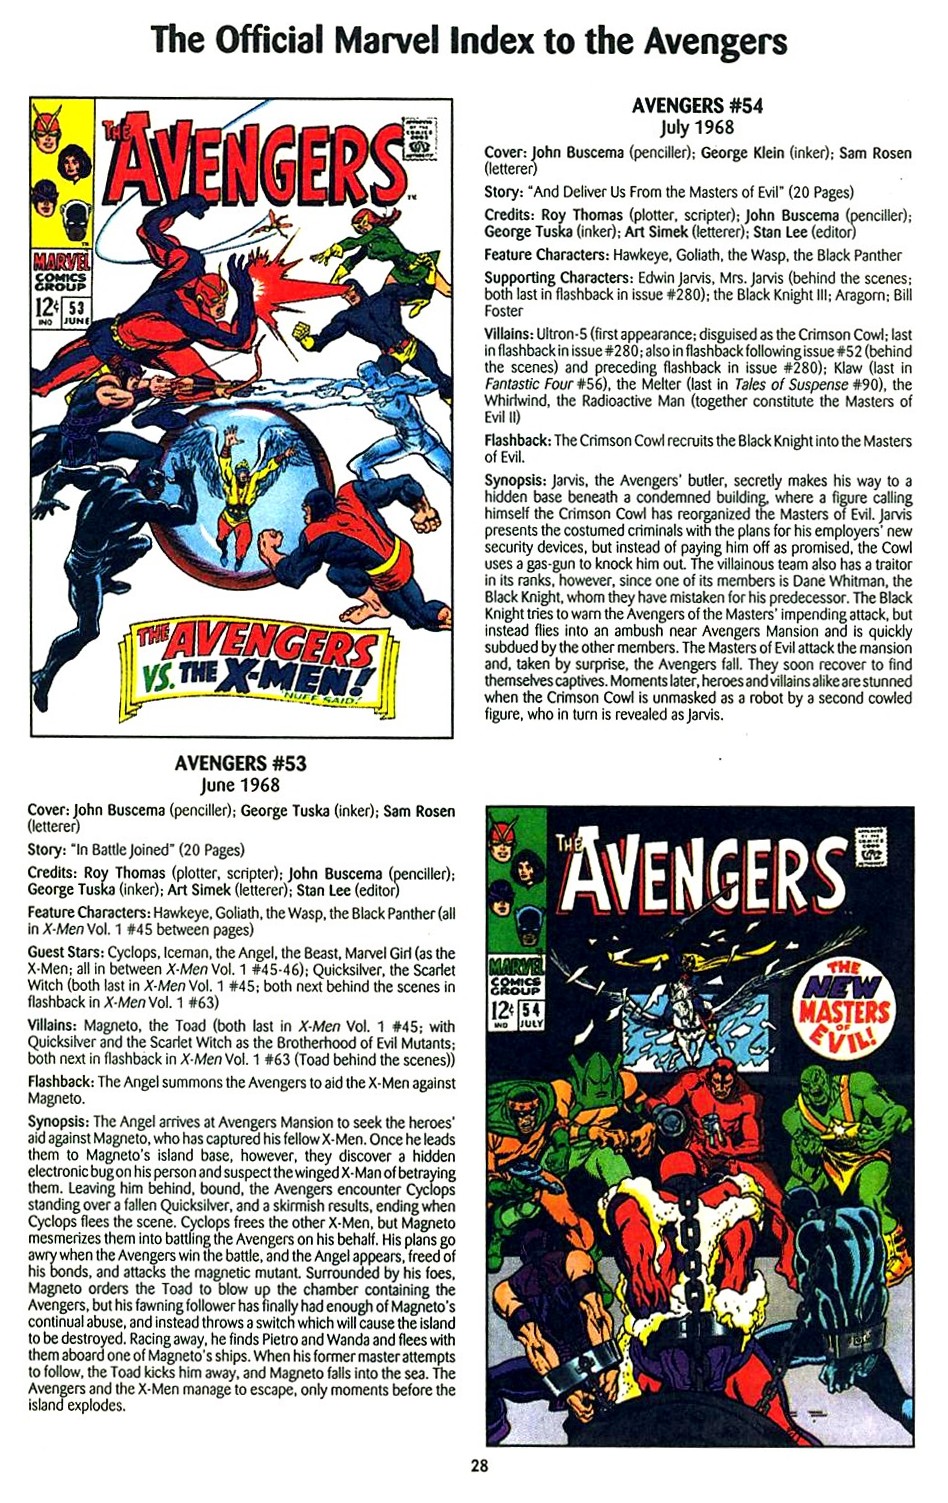 Read online The Official Marvel Index to the Avengers comic -  Issue #1 - 30